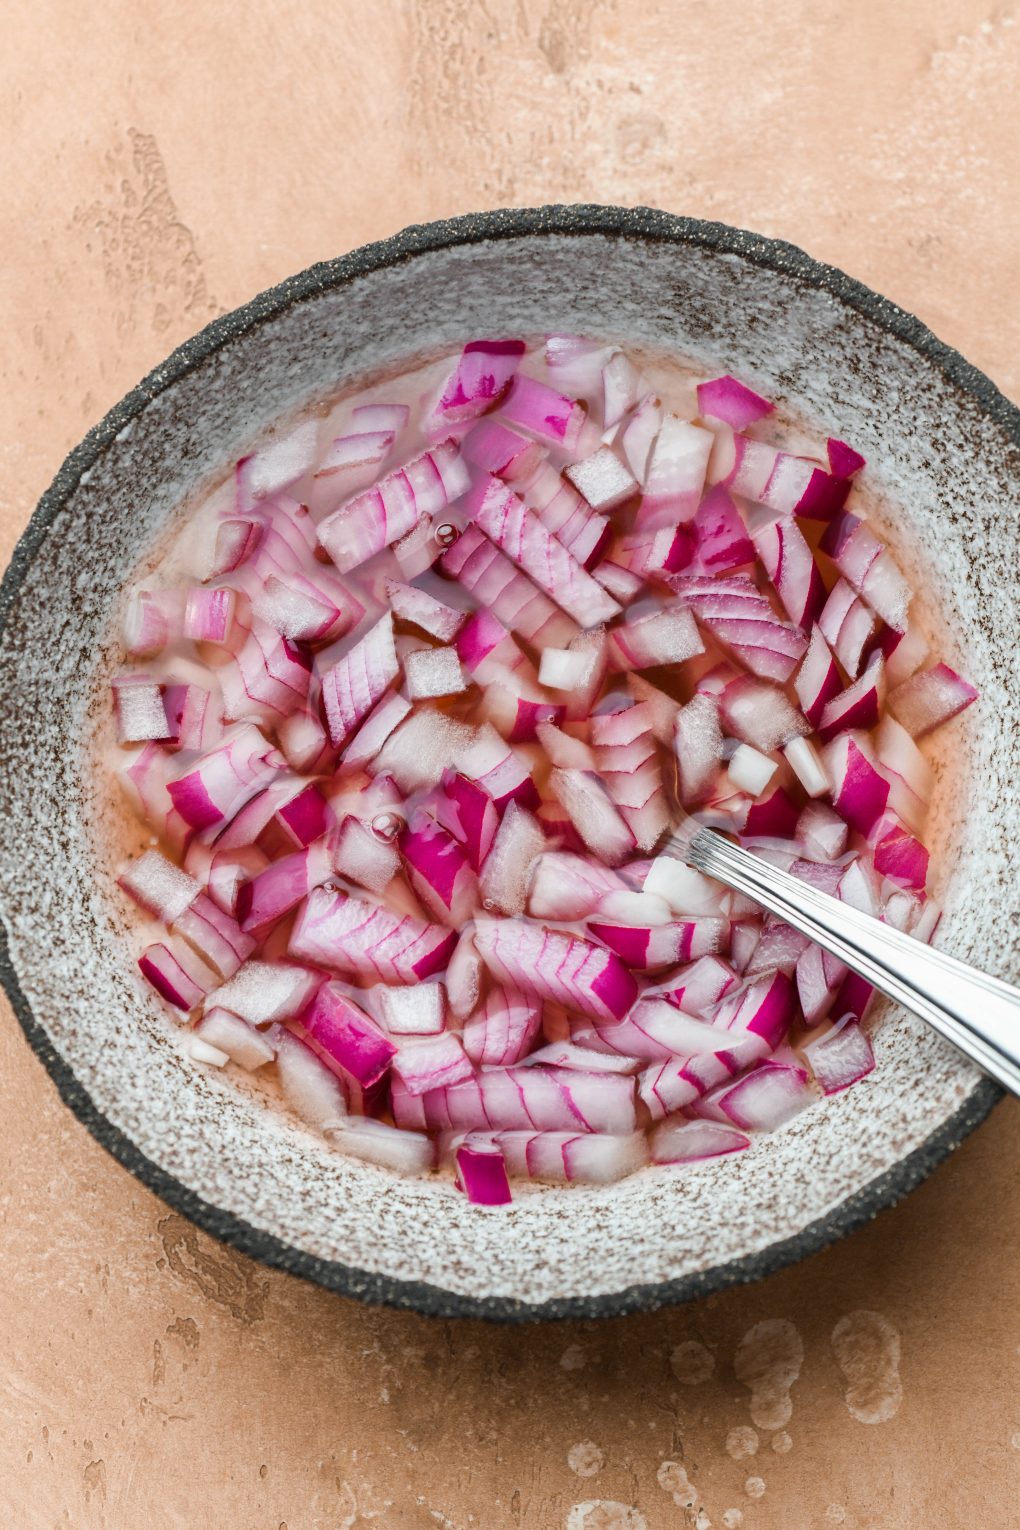 Chopped pickled red onions in a shallow textured bowl. On a light brown background.